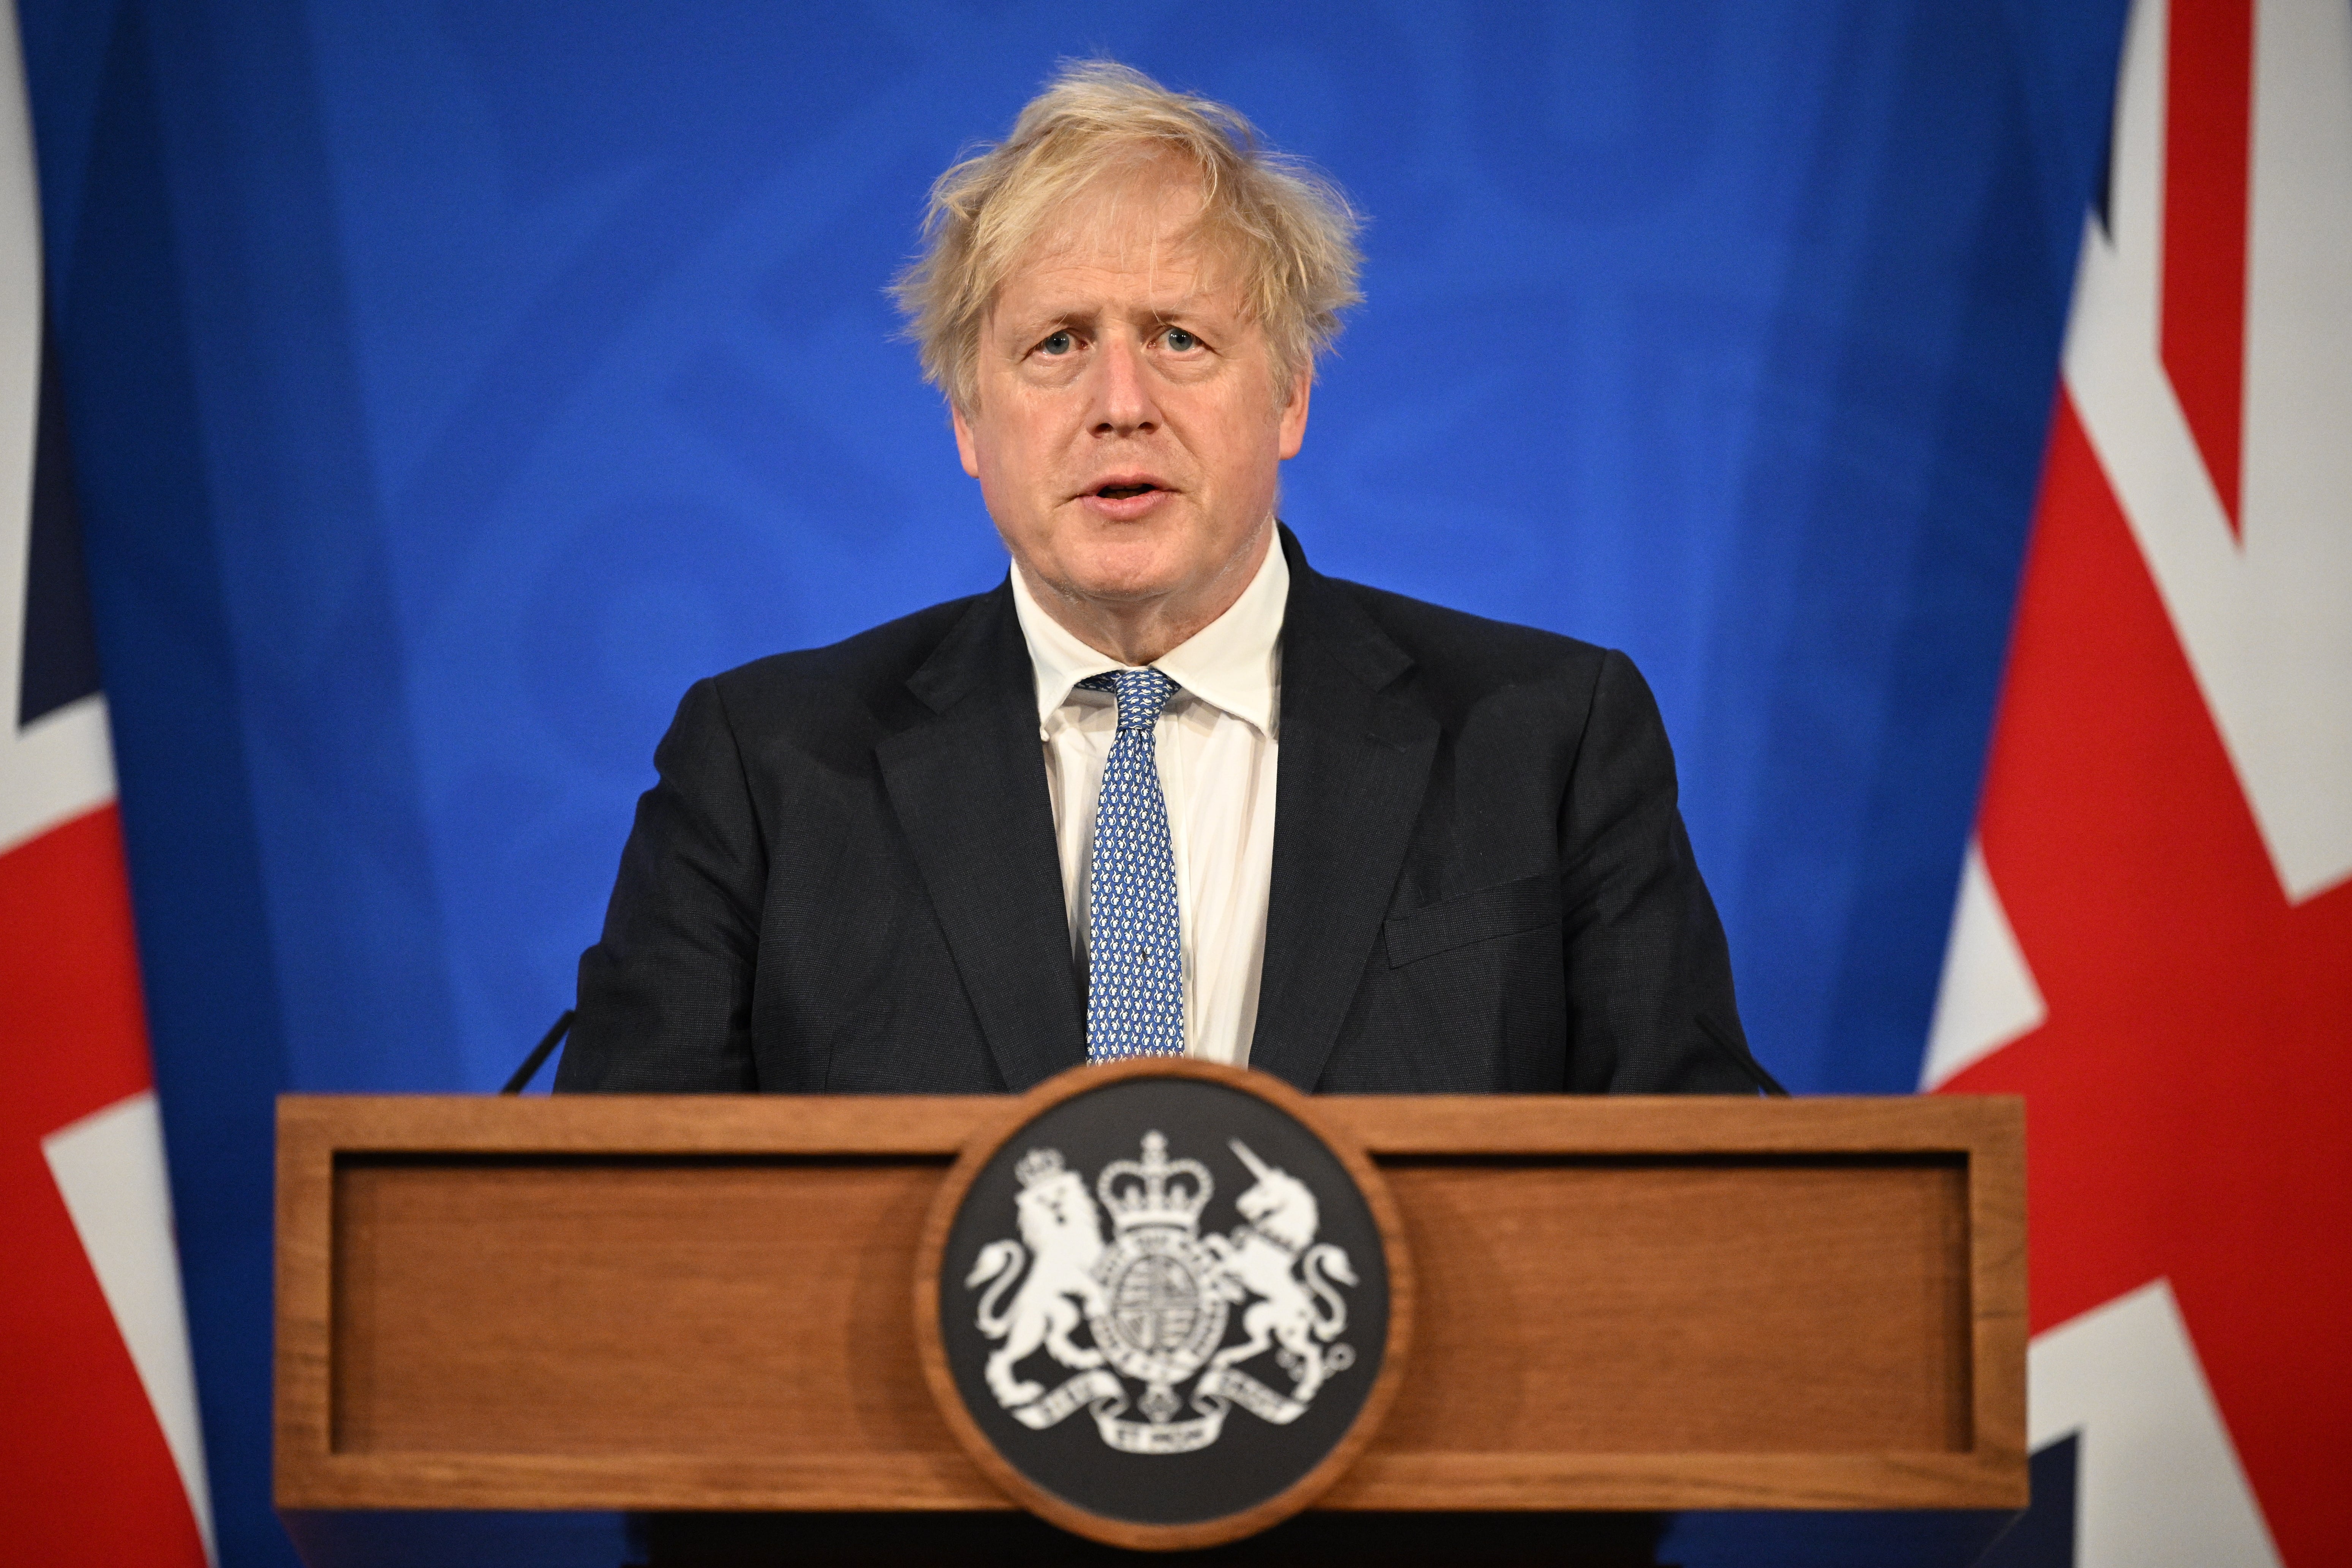 Boris Johnson speaks during a press conference in Downing Street on Wednesday